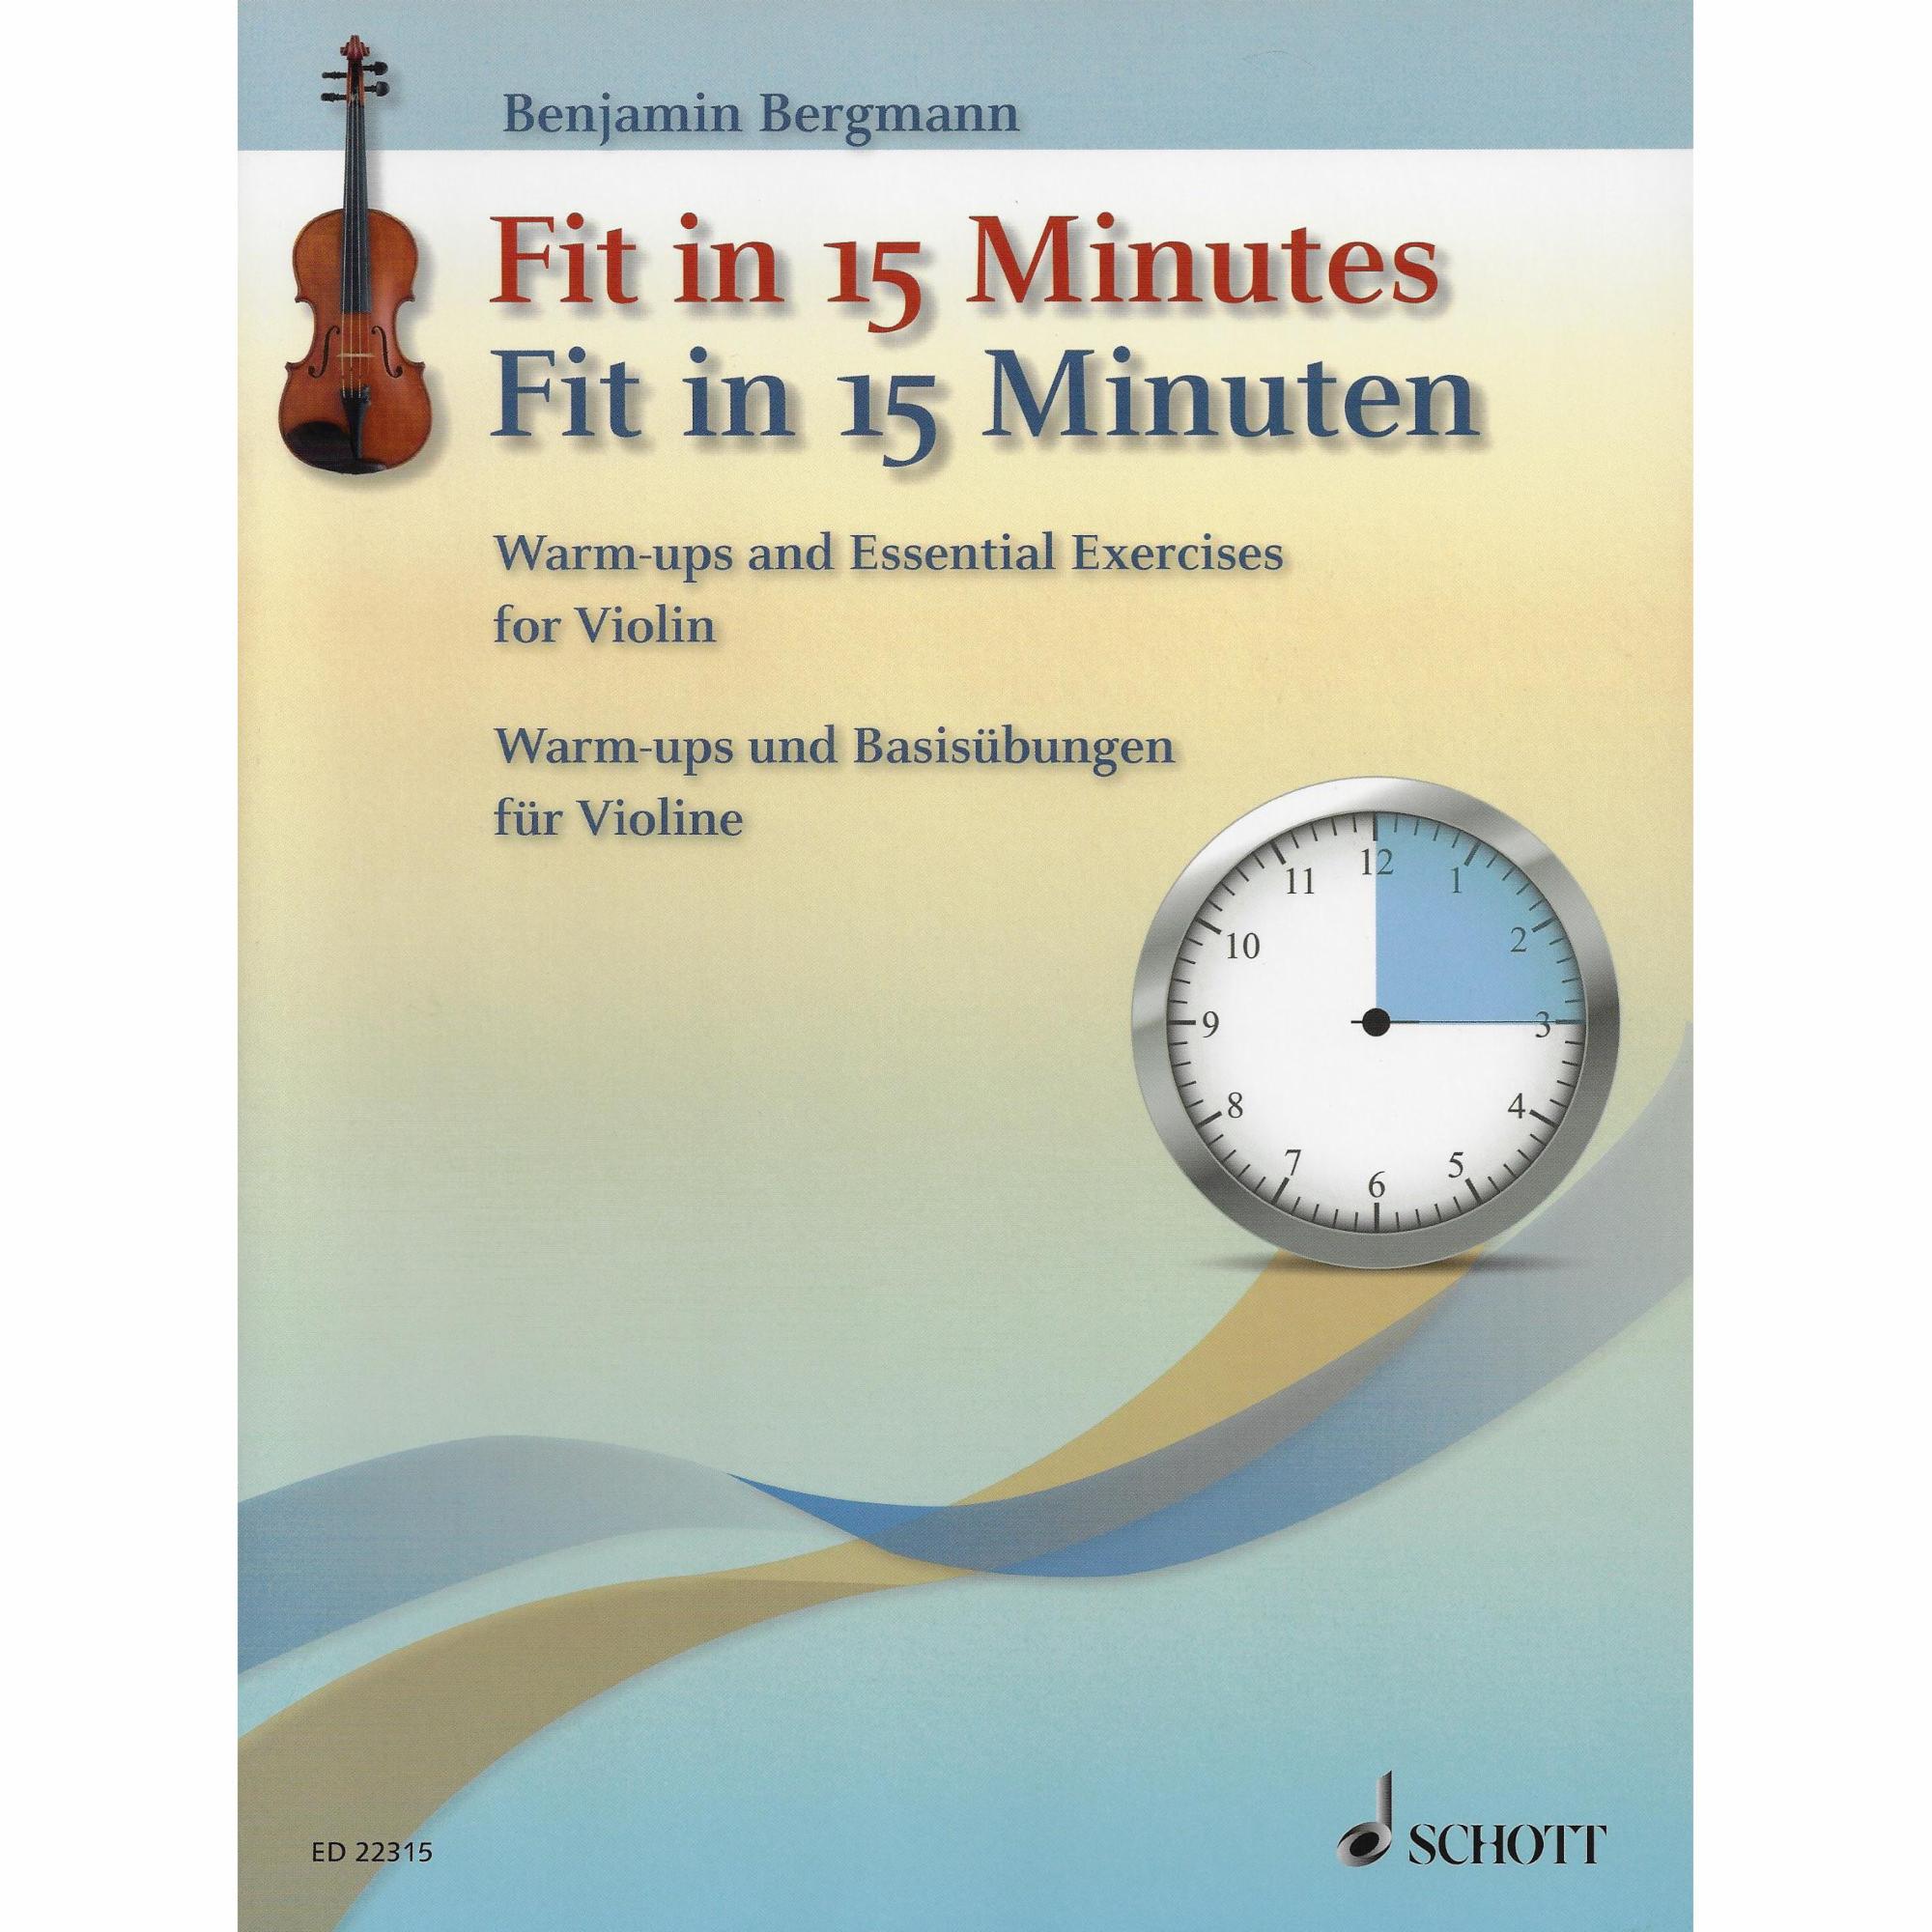 Fit in 15 Minutes for Violin